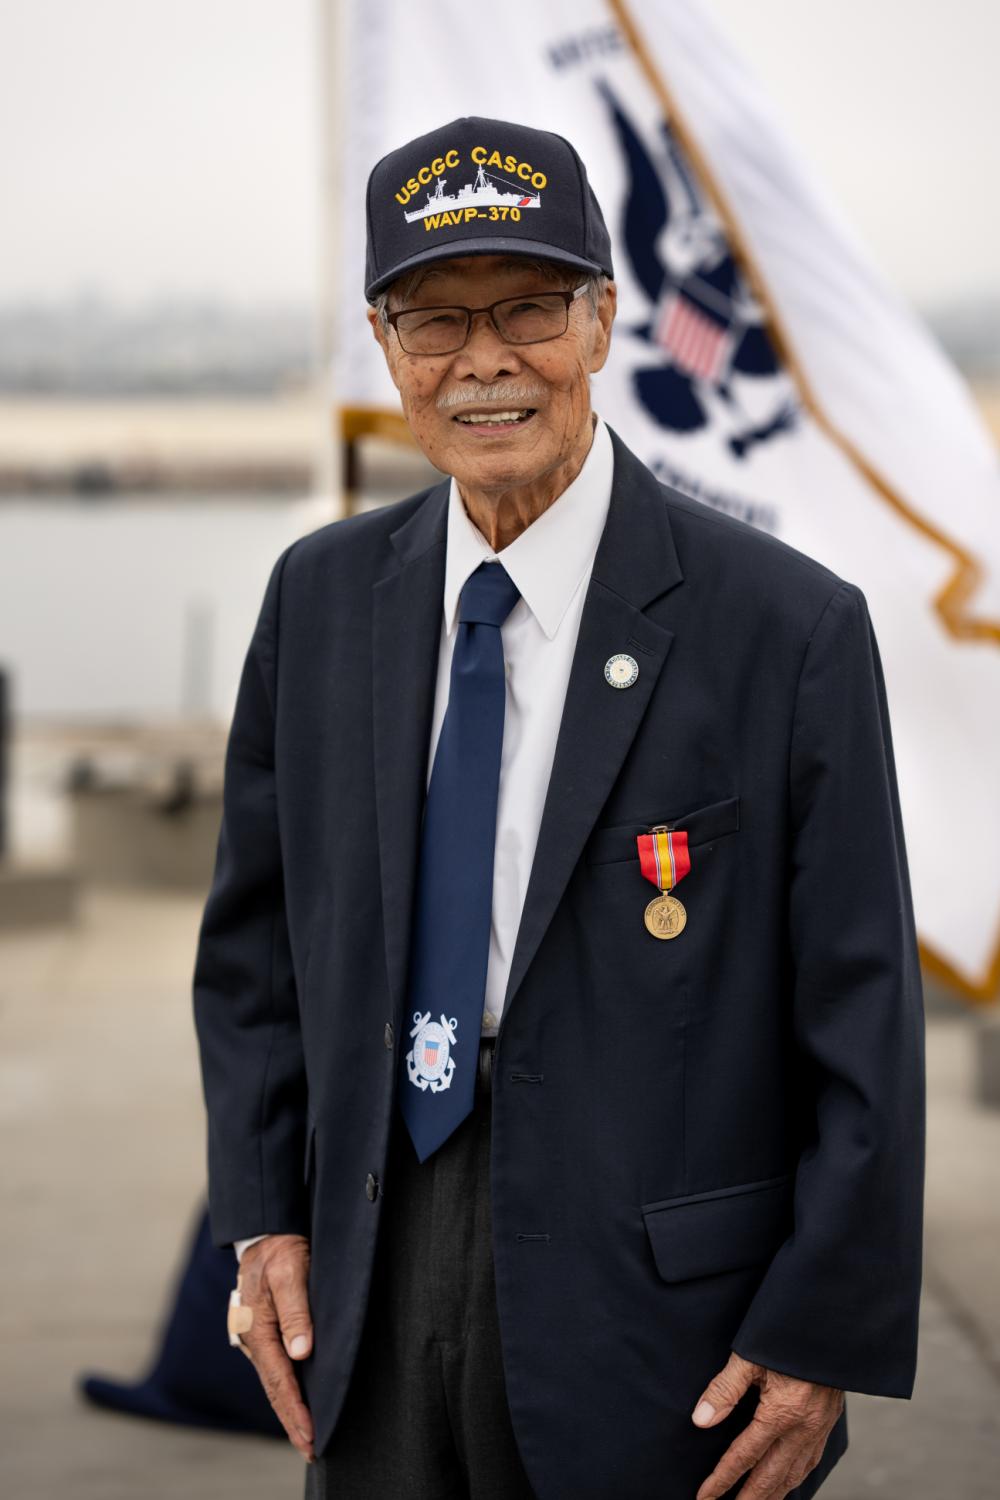 Rikio Izumi, Coast Guard veteran, poses for a photo at a ceremony awarding him the National Defense Service Medal for his service during the Korean War, San Pedro, California, June 10, 2022. Mr. Izumi served on the Coast Guard Cutter Casco from 1951 to 1953. (U.S. Coast Guard photo by Petty Officer 3rd Class Aidan Cooney)